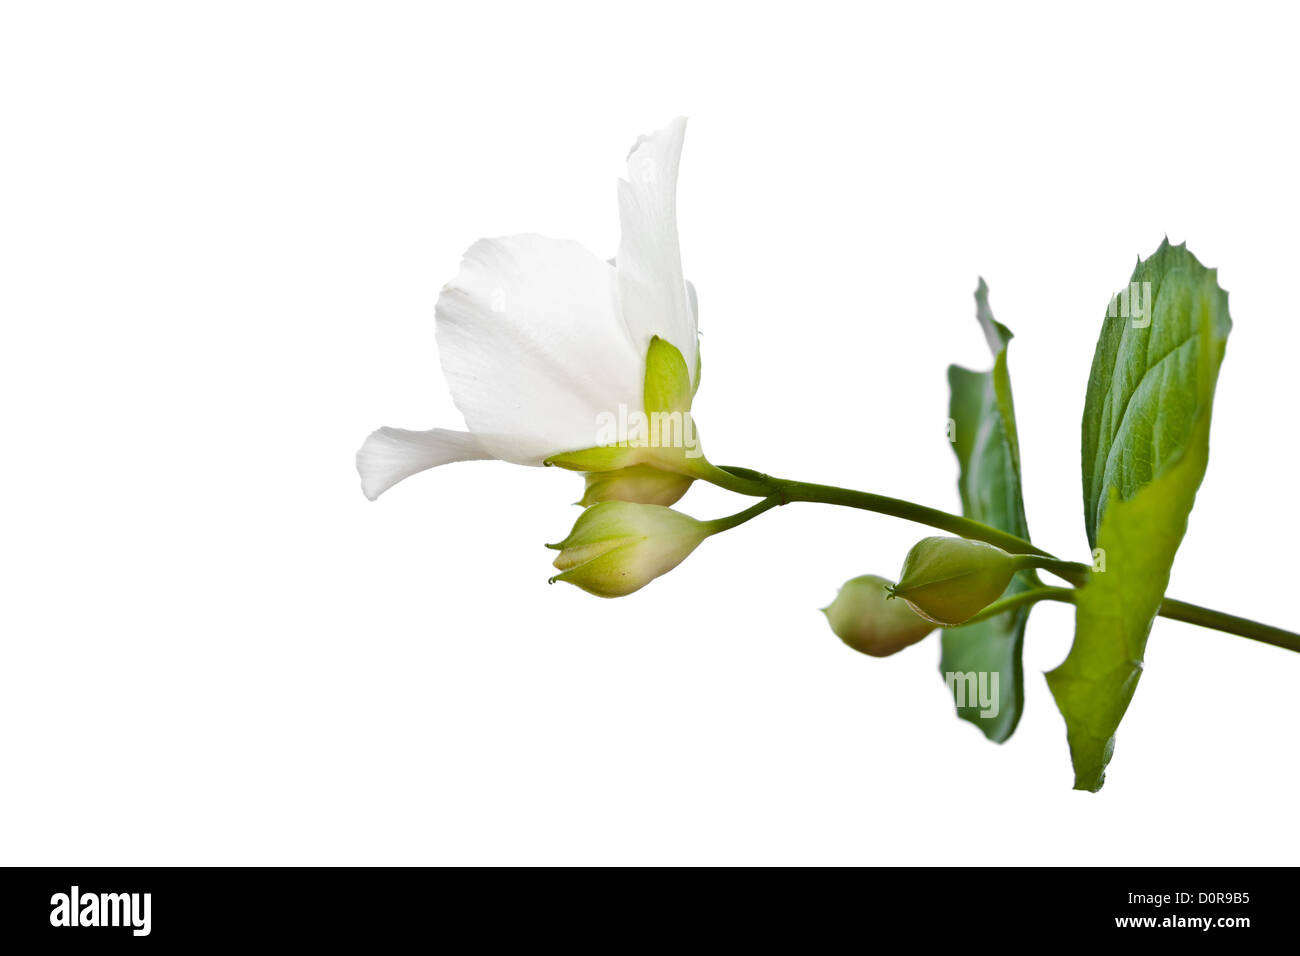 Flower jasmine Cut Out Stock Images & Pictures - Alamy